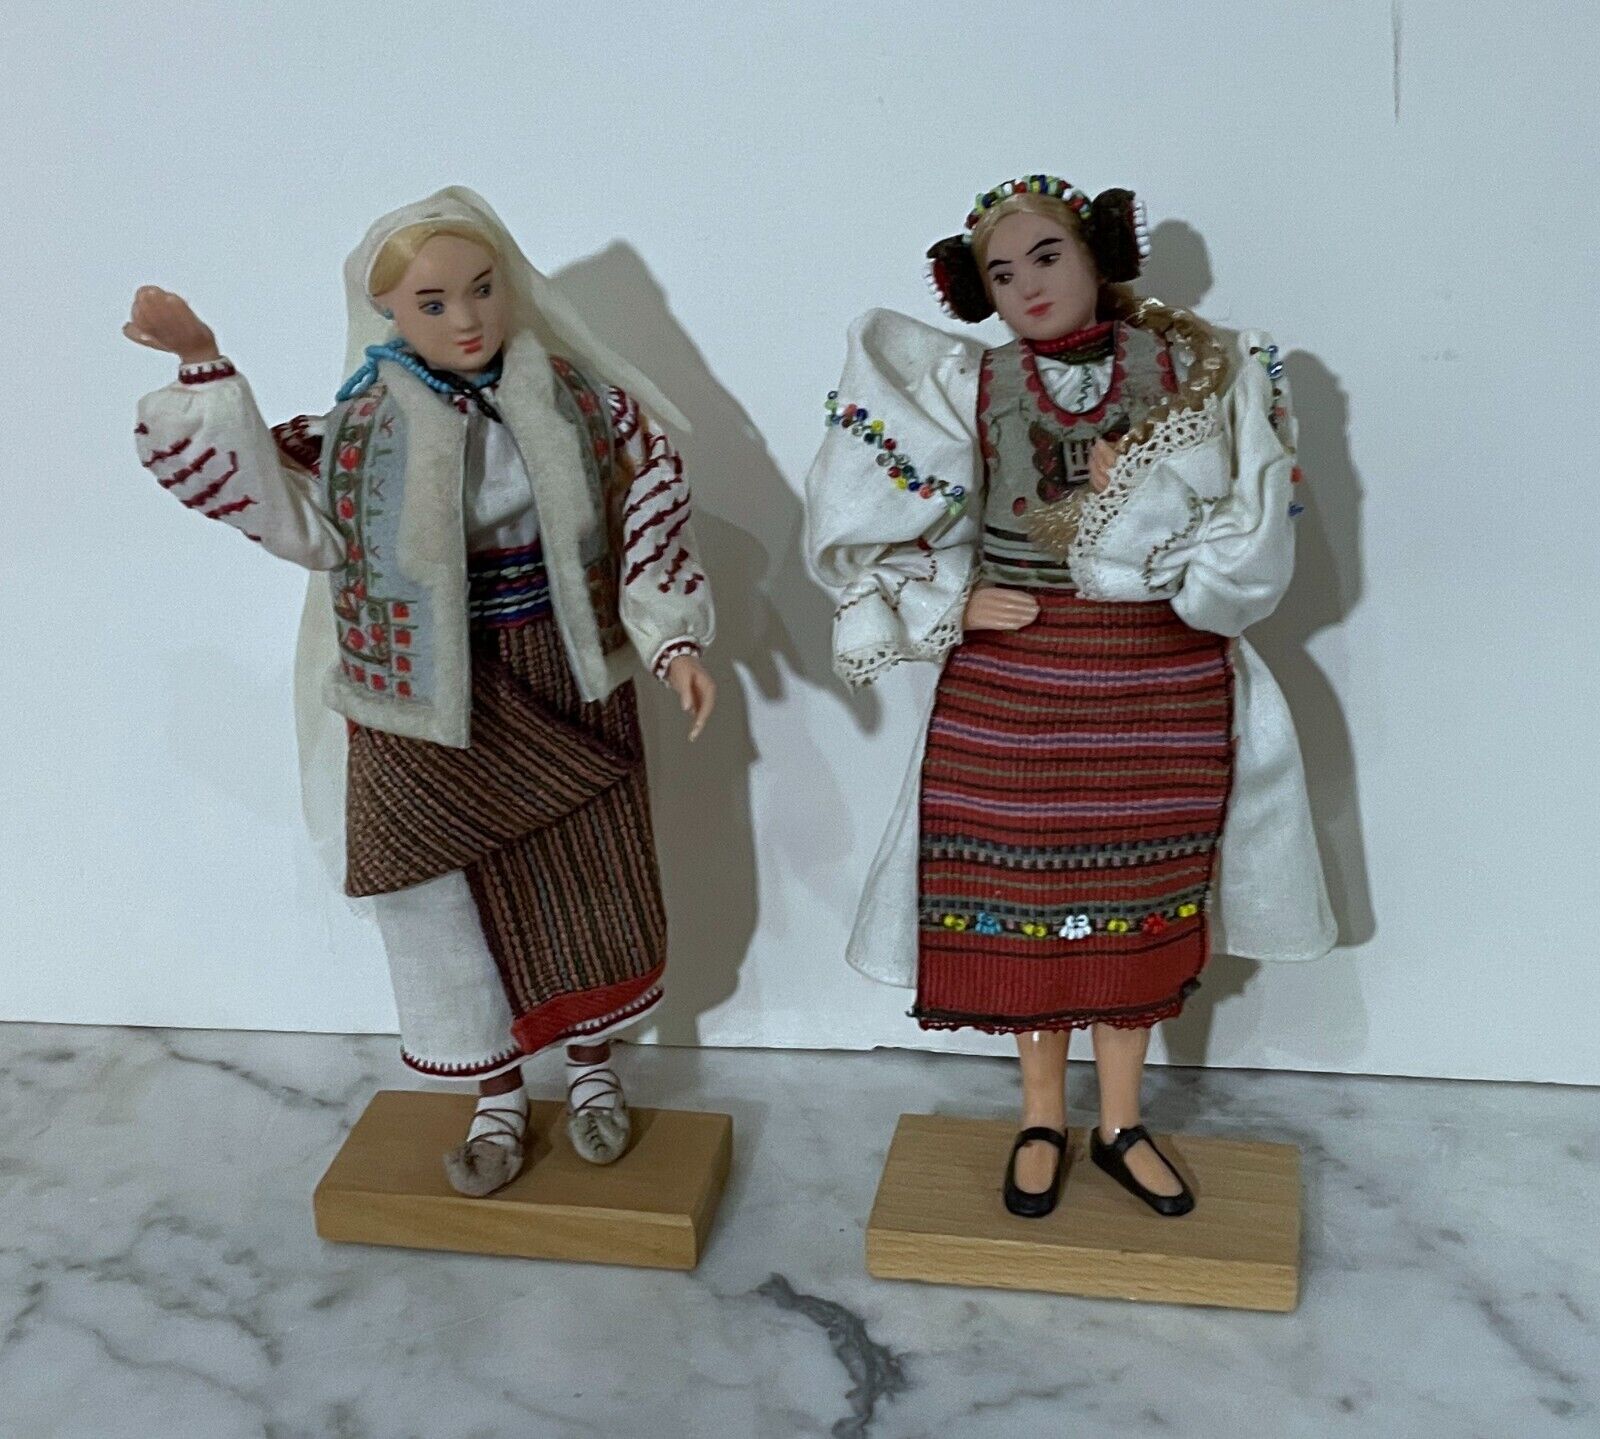 TWO BEAUTIFUL VINTAGE EUROPEAN ROMANIAN DOLLS OF FEMALES IN TRADITIONAL CLOTHES